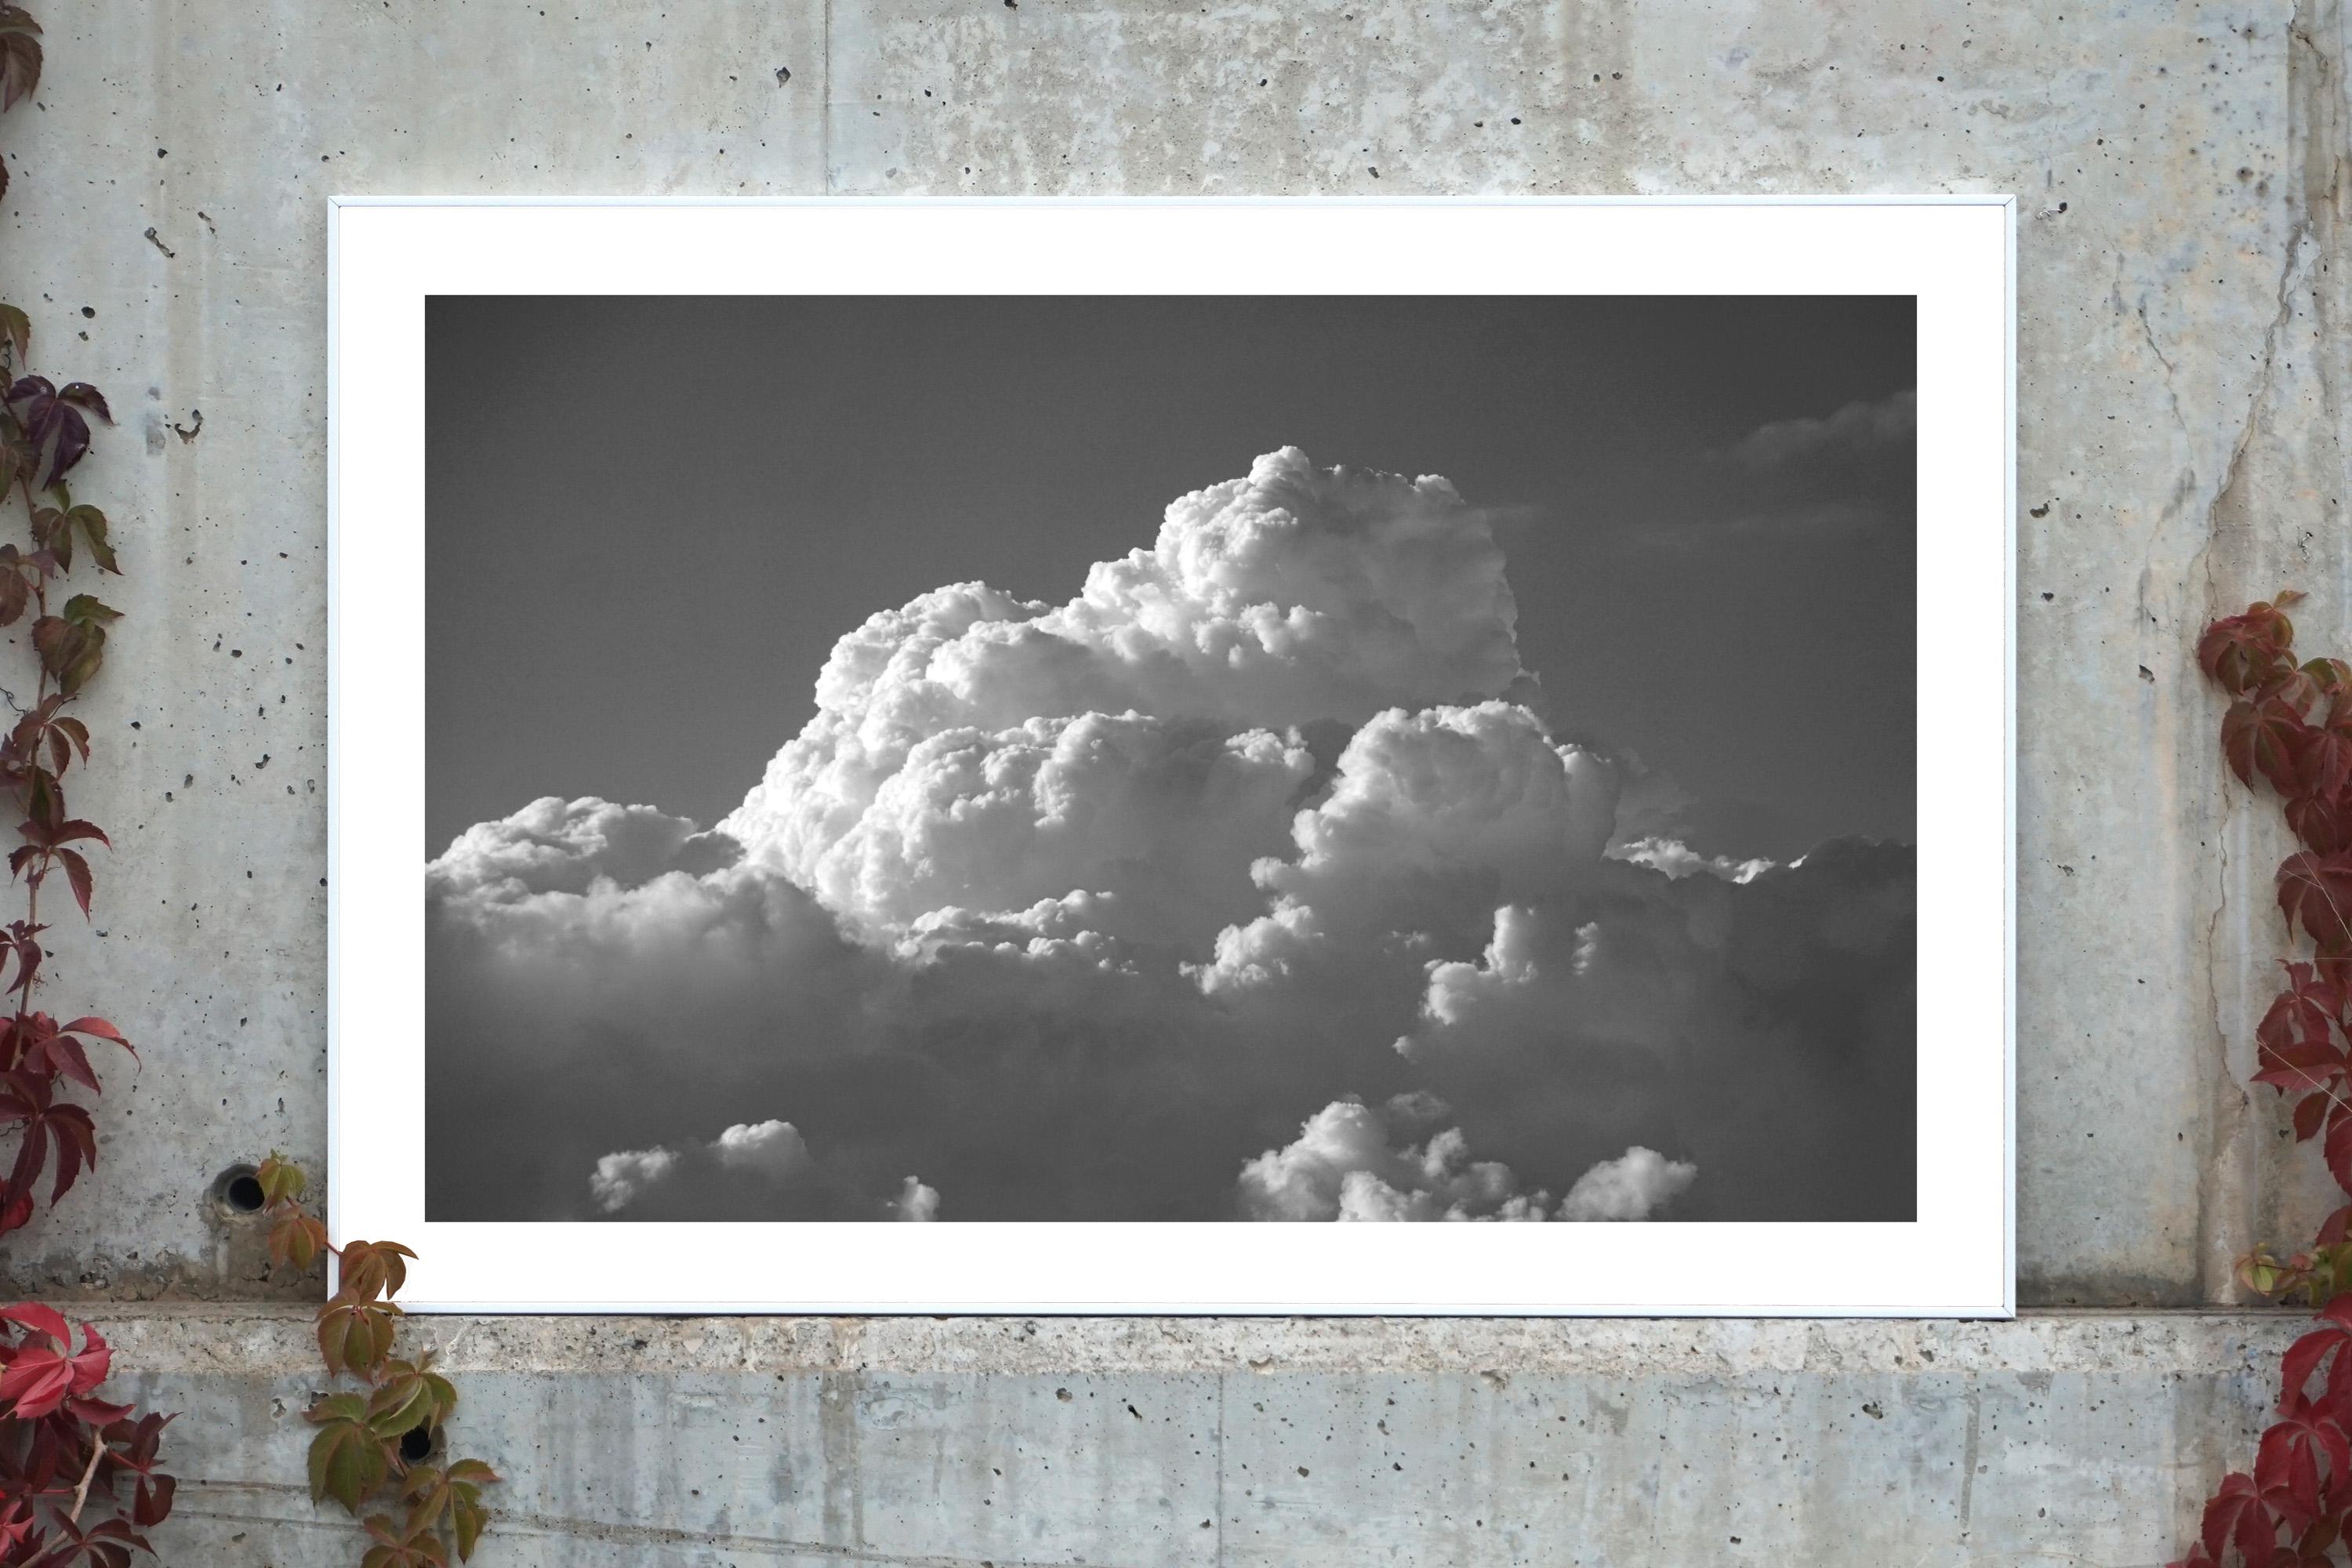 Zen Clouds Landscape in Black and White, Limited Edition Giclée Print, Sky Scape - Photograph by Kind of Cyan